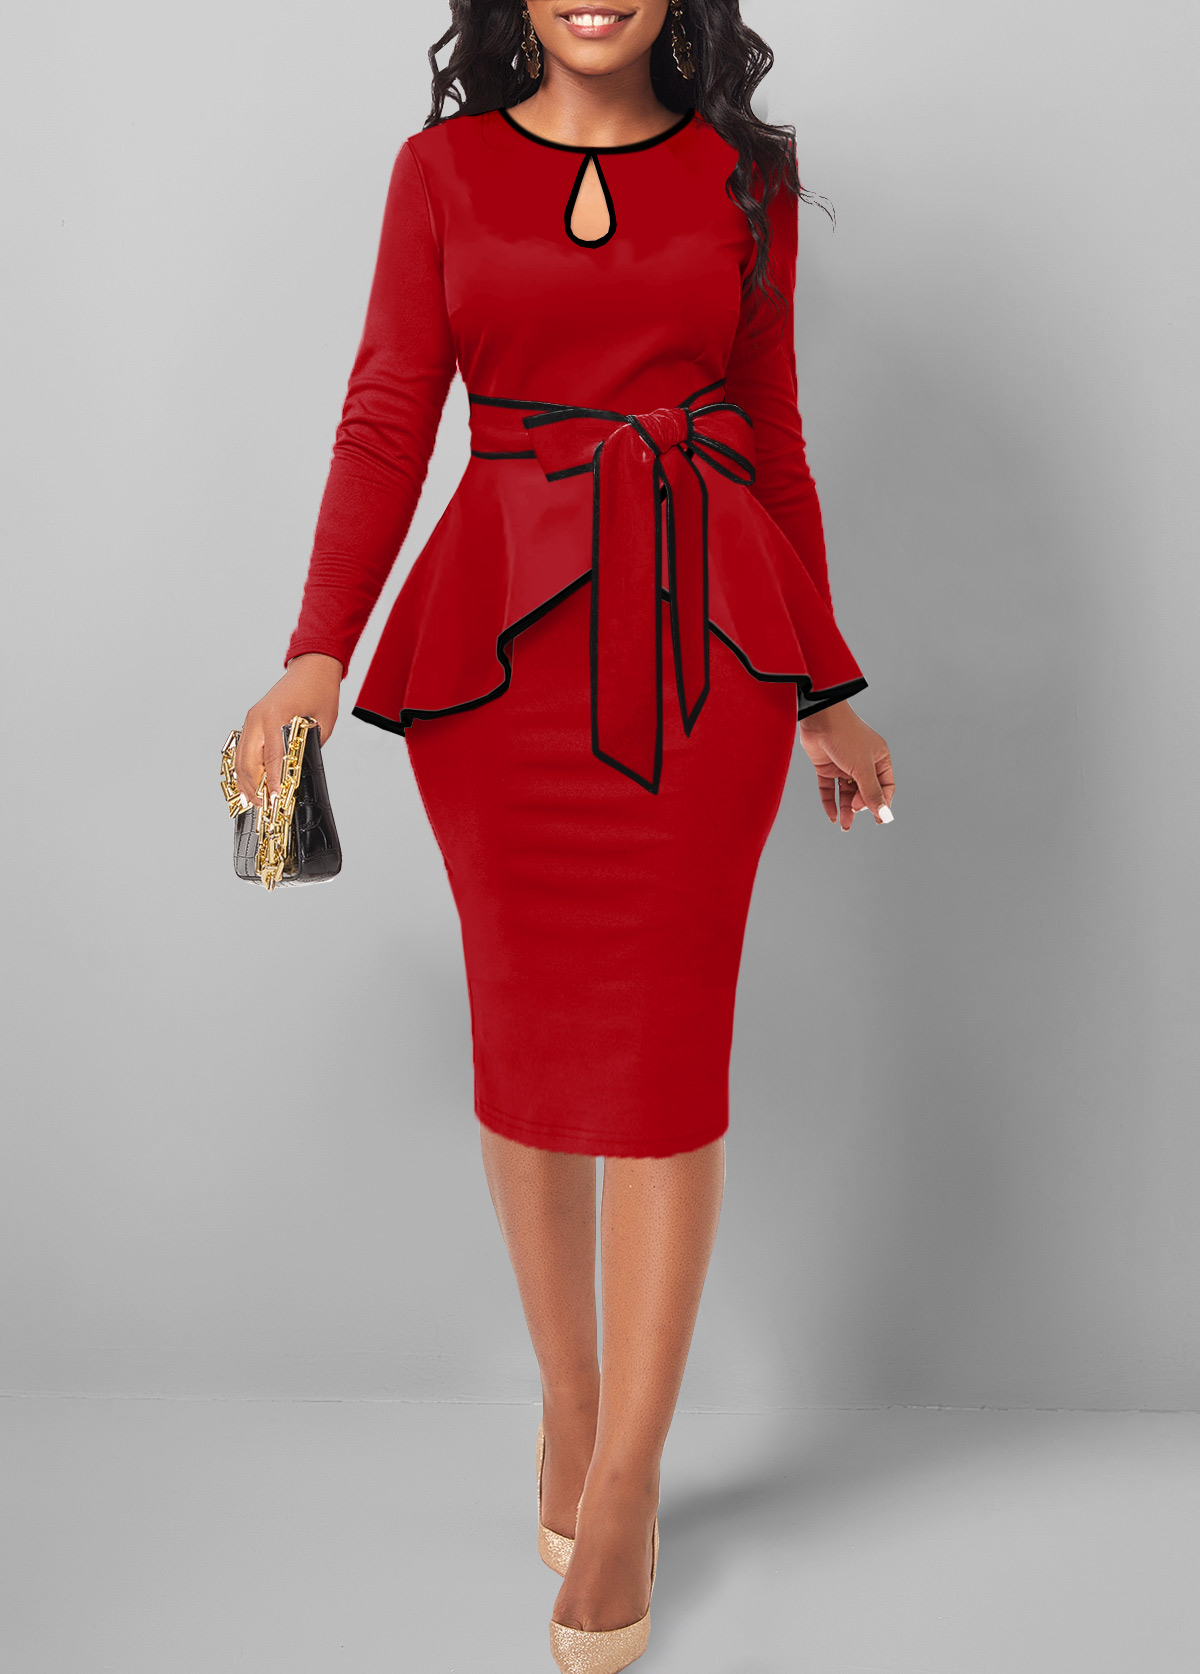 Contrast Binding Belted Red Round Neck Bodycon Dress